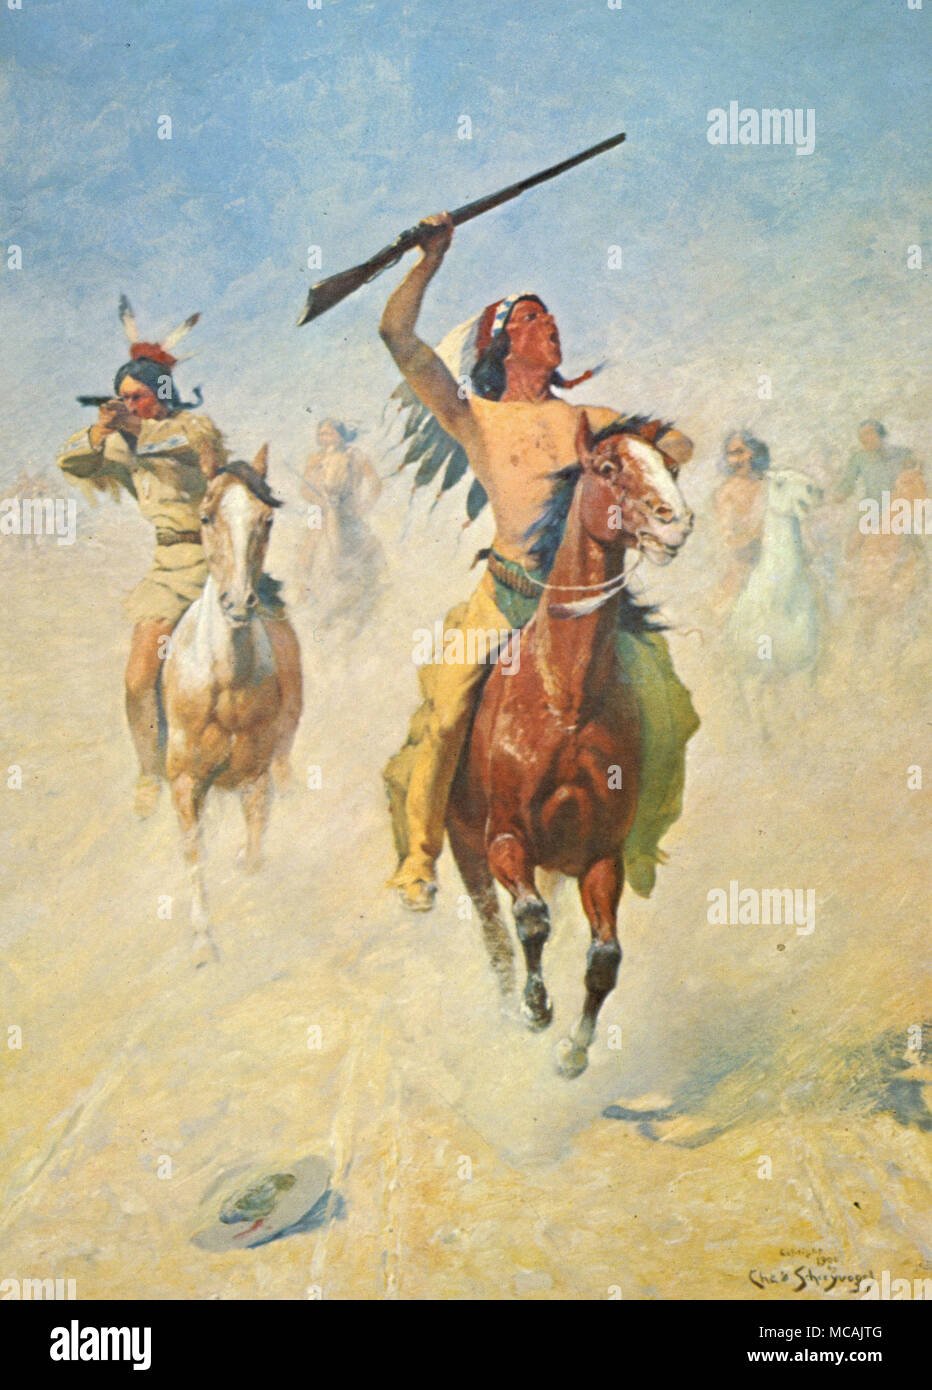 In pursuit of an army column braves hold and fire their weapons.  Charles Schreyvogel (January 4, 1861-January 27, 1912) was a painter of Western subject matter in the days of the disappearing frontier. Schreyvogel was especially interested in military life. Stock Photo